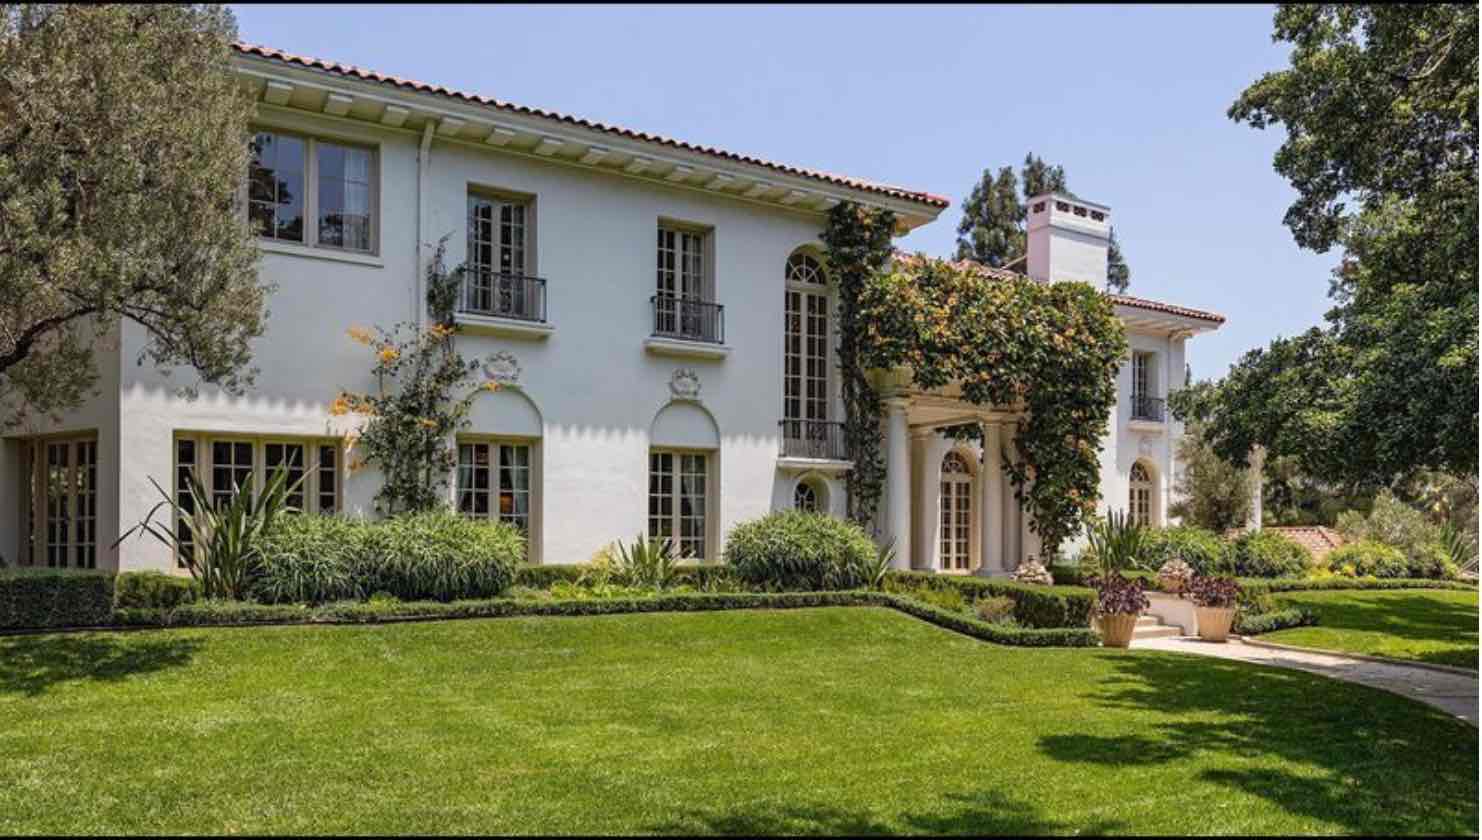 Celebrity Home Sales Prices in Los Angeles Soared in 2017, Homes of the rich and famous, movie star homes in Los Angeles, Celebrity houses for sale